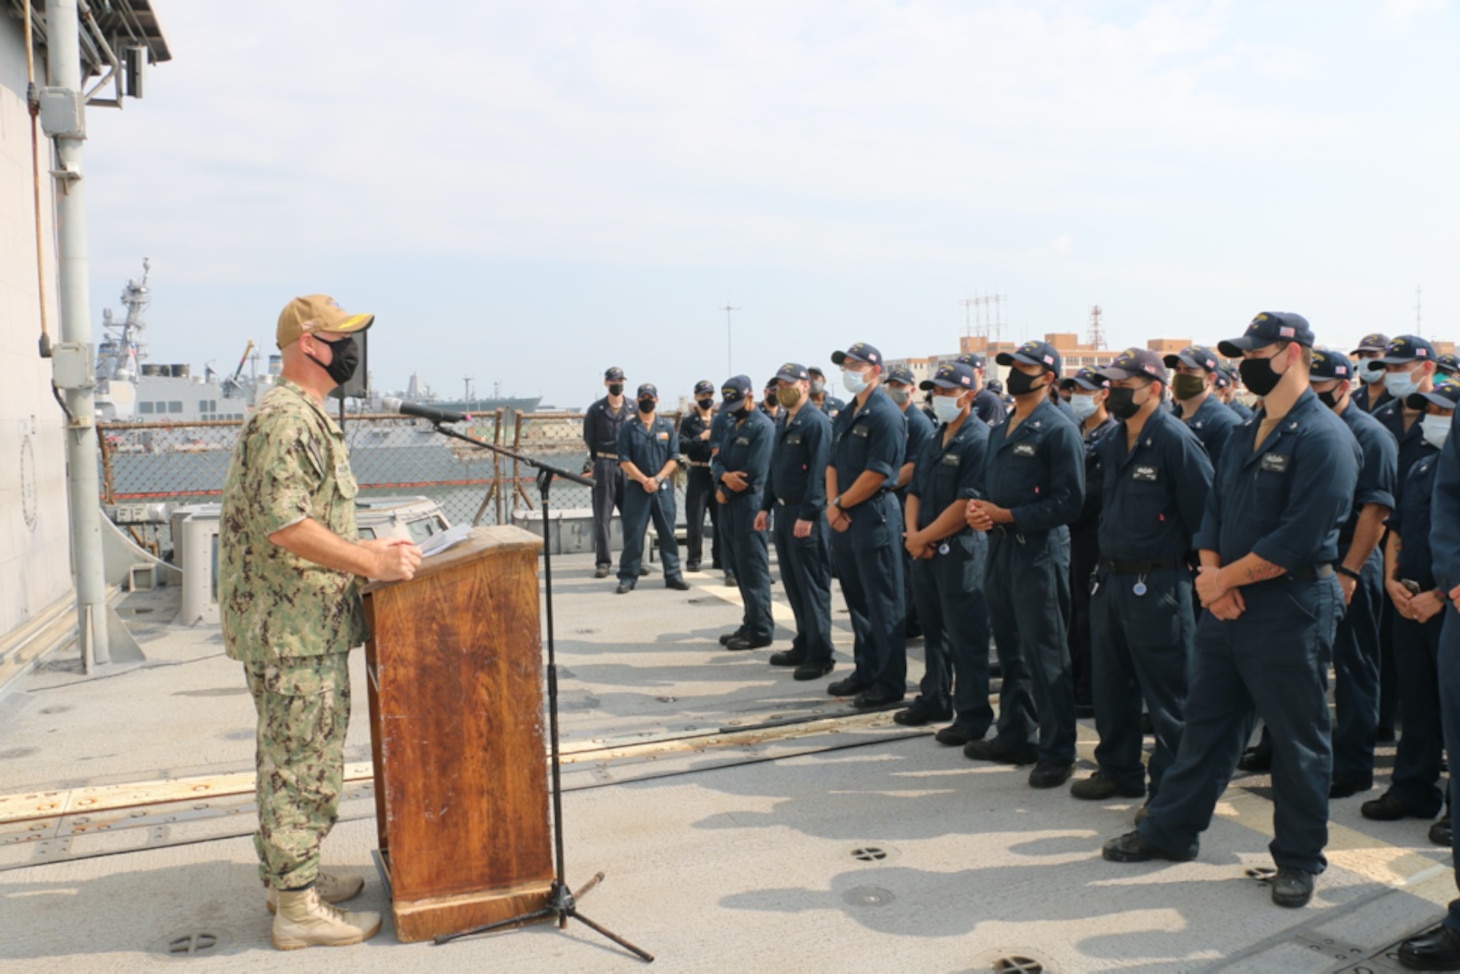 NAVAL STATION NORFOLK (Aug. 2, 2021) – Rear Adm. Brendan McLane, commander, Naval Surface Force Atlantic, speaks to the crew of the guided-missile cruiser USS San Jacinto (CG 56). McLane presented the crew with the Navy Unit Commendation for their leadership and hard work in support of the Dwight D. Eisenhower Carrier Strike Group during their 2020 deployment, which lasted 206 days with no port visits. (U.S. Navy photo by Boatswain’s Mate 3rd Class Danielle Bordine/Released)